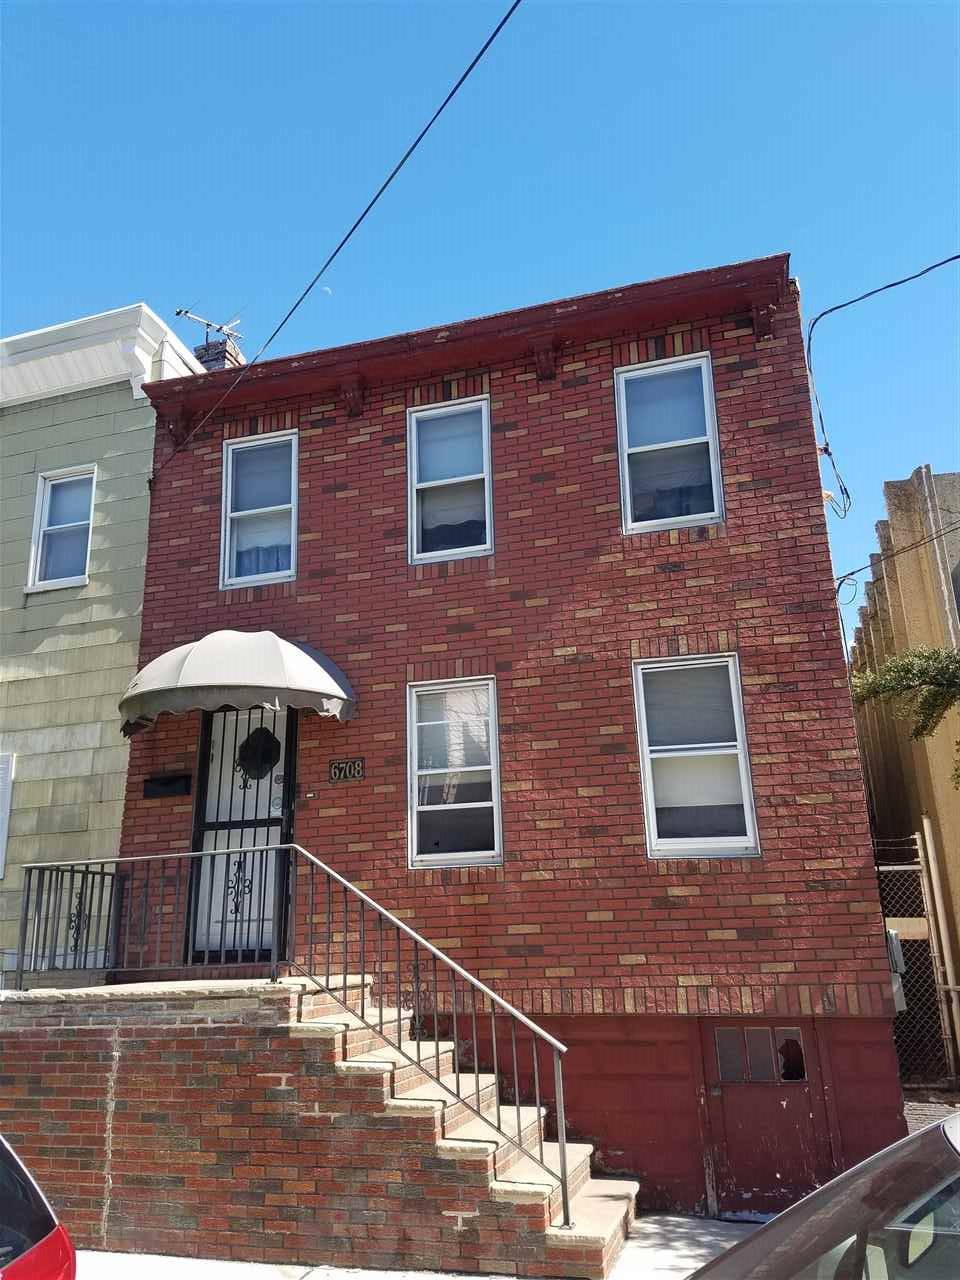 Welcome home to this start up 1 family home - 2 BR New Jersey